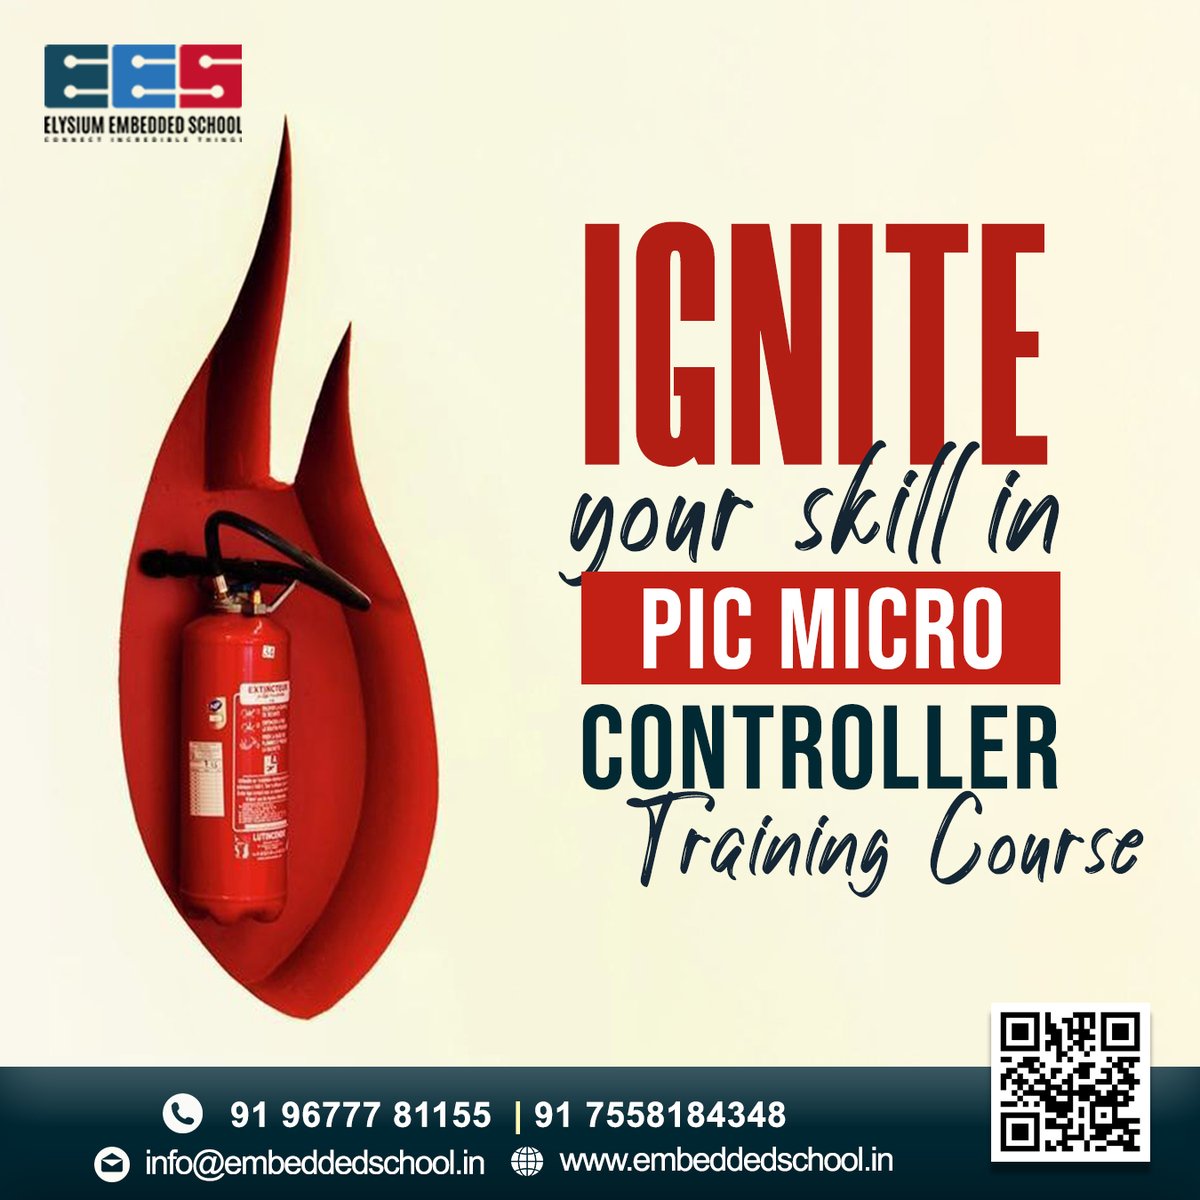 🔥 Are you ready to take your skills to the next level? Join us at Elysium Embedded School for an electrifying PIC Microcontroller Training Course! ⚡ 🤳Ping us: rfr.bz/tlbszyj 📲WhatsApp Chat: rfr.bz/tlbszyk #elysiumembeddedschool #no1trainingacademy